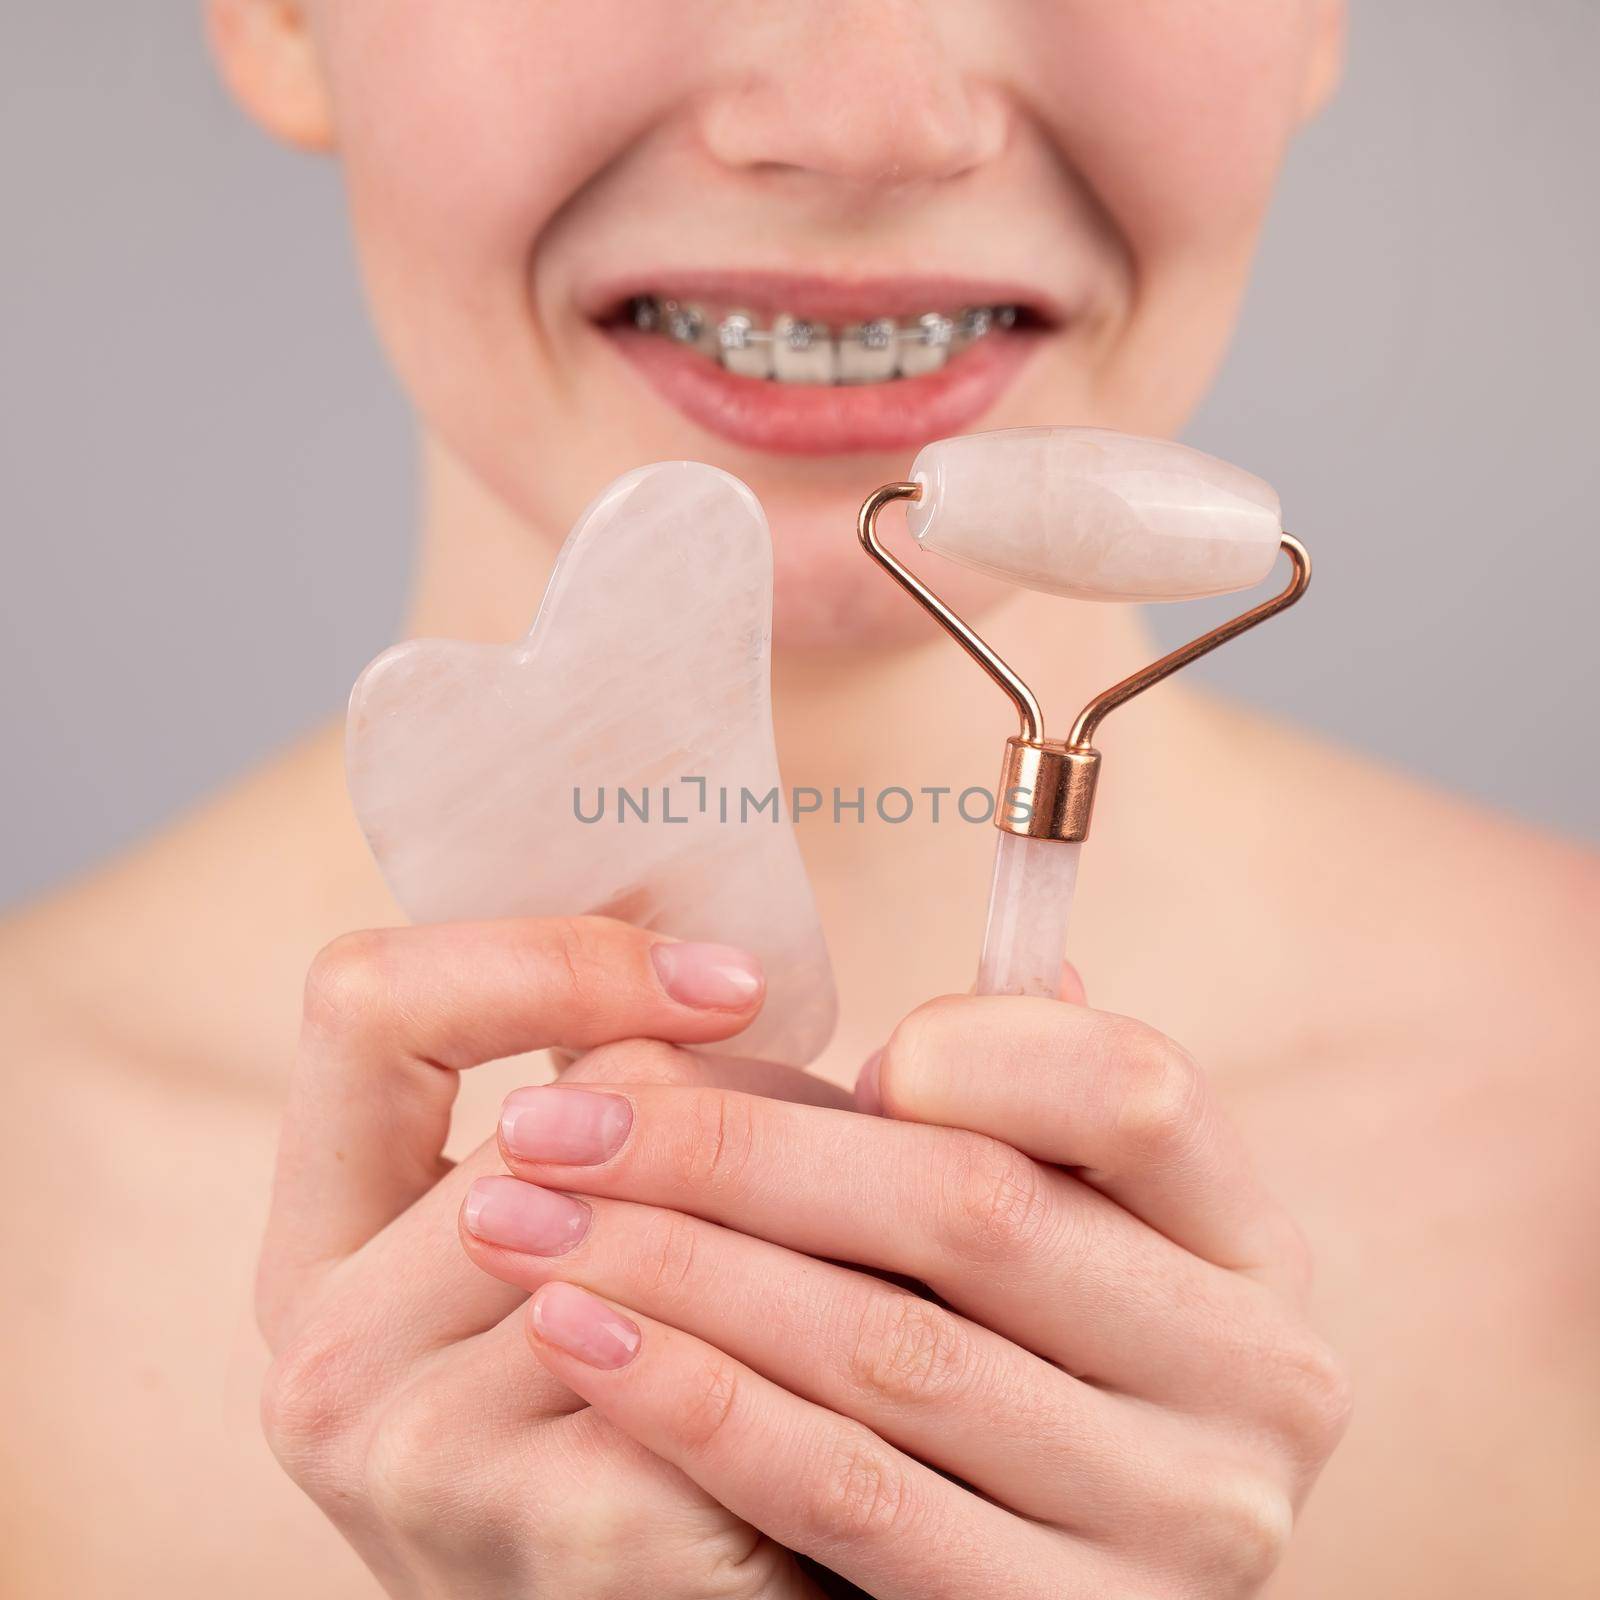 Close-up portrait of a woman with braces on her teeth holding a pink roller massager and a gouache scraper on a white background